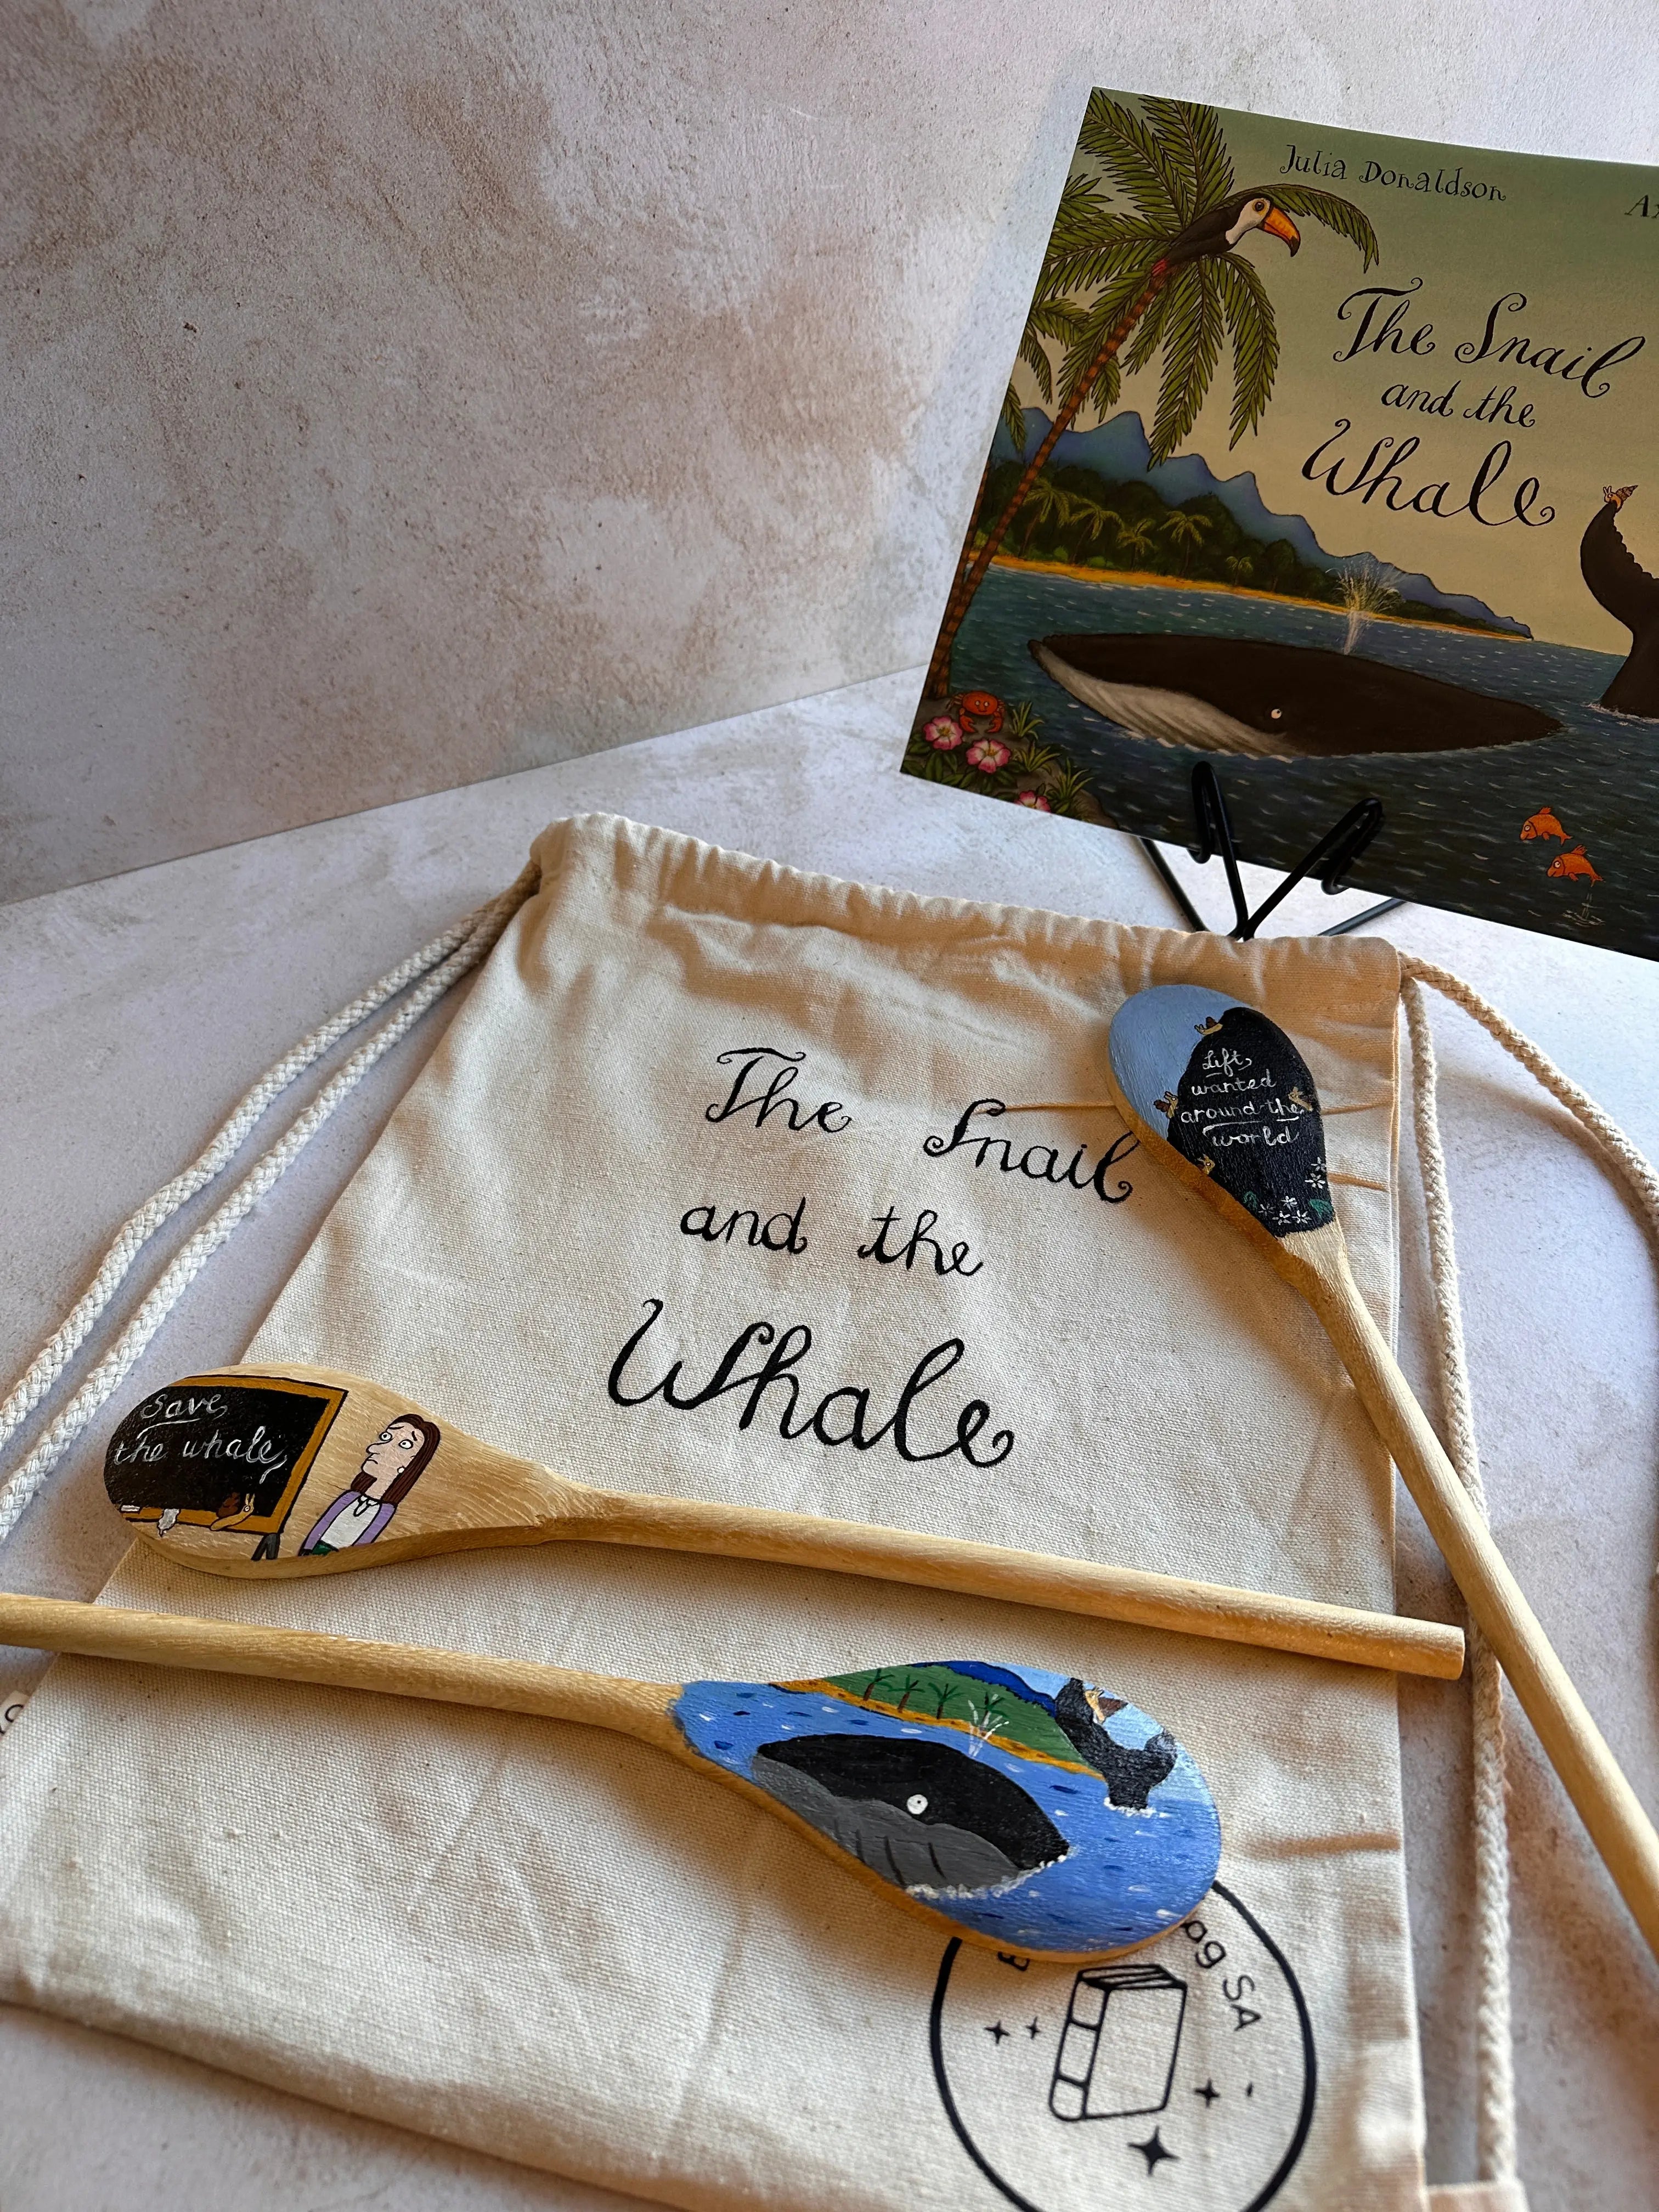 Book in a bag - The Snail and the whale Book in a bag